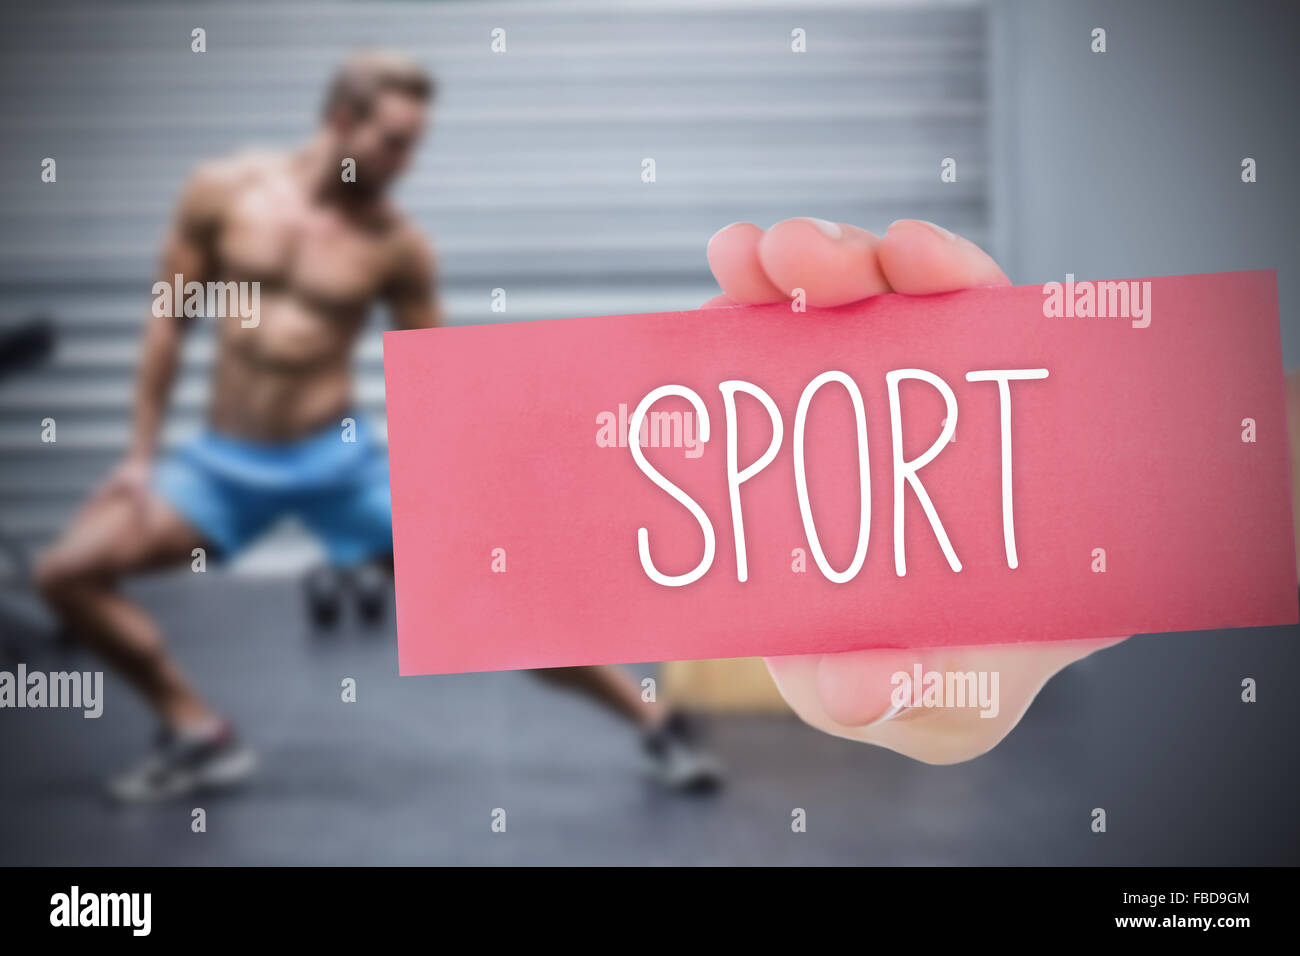 Sport against people background Stock Photo